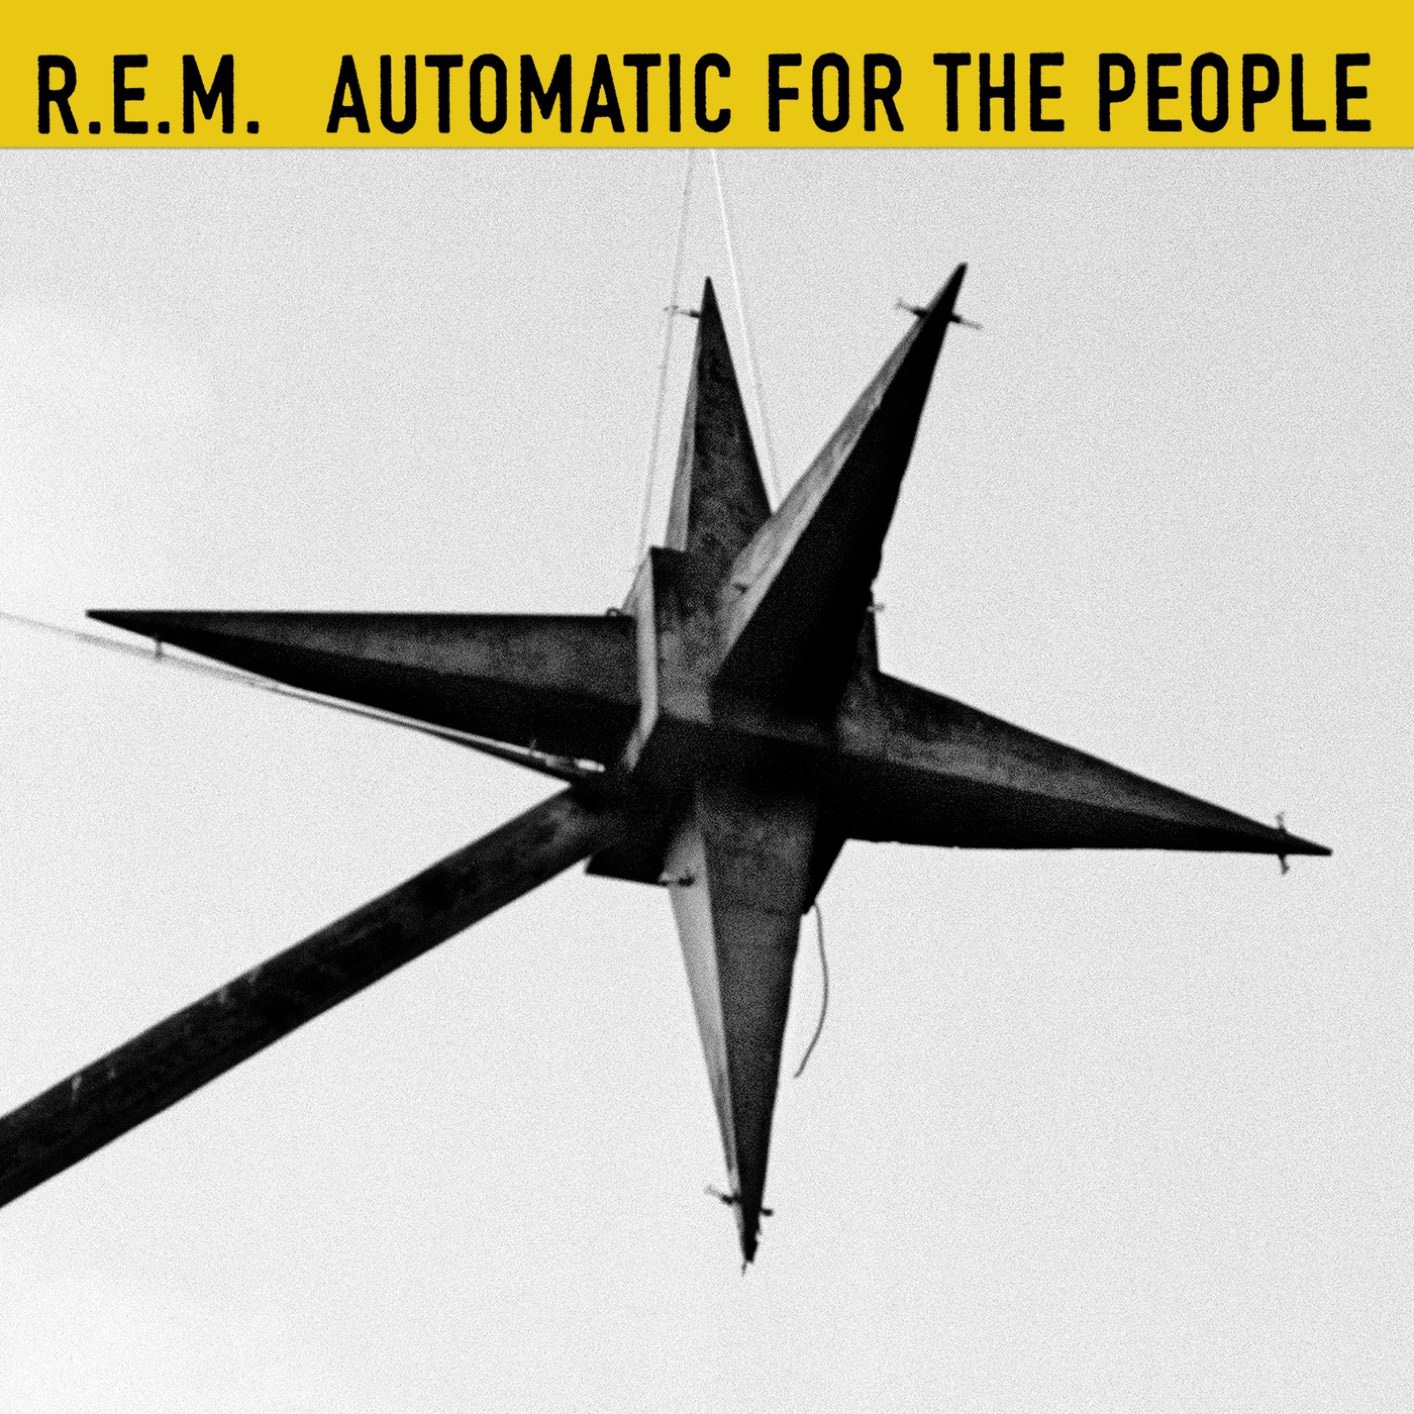 R.E.M. - Automatic For The People {25th Anniversary Edition} (1992/2017) [FLAC 24bit/96kHz]